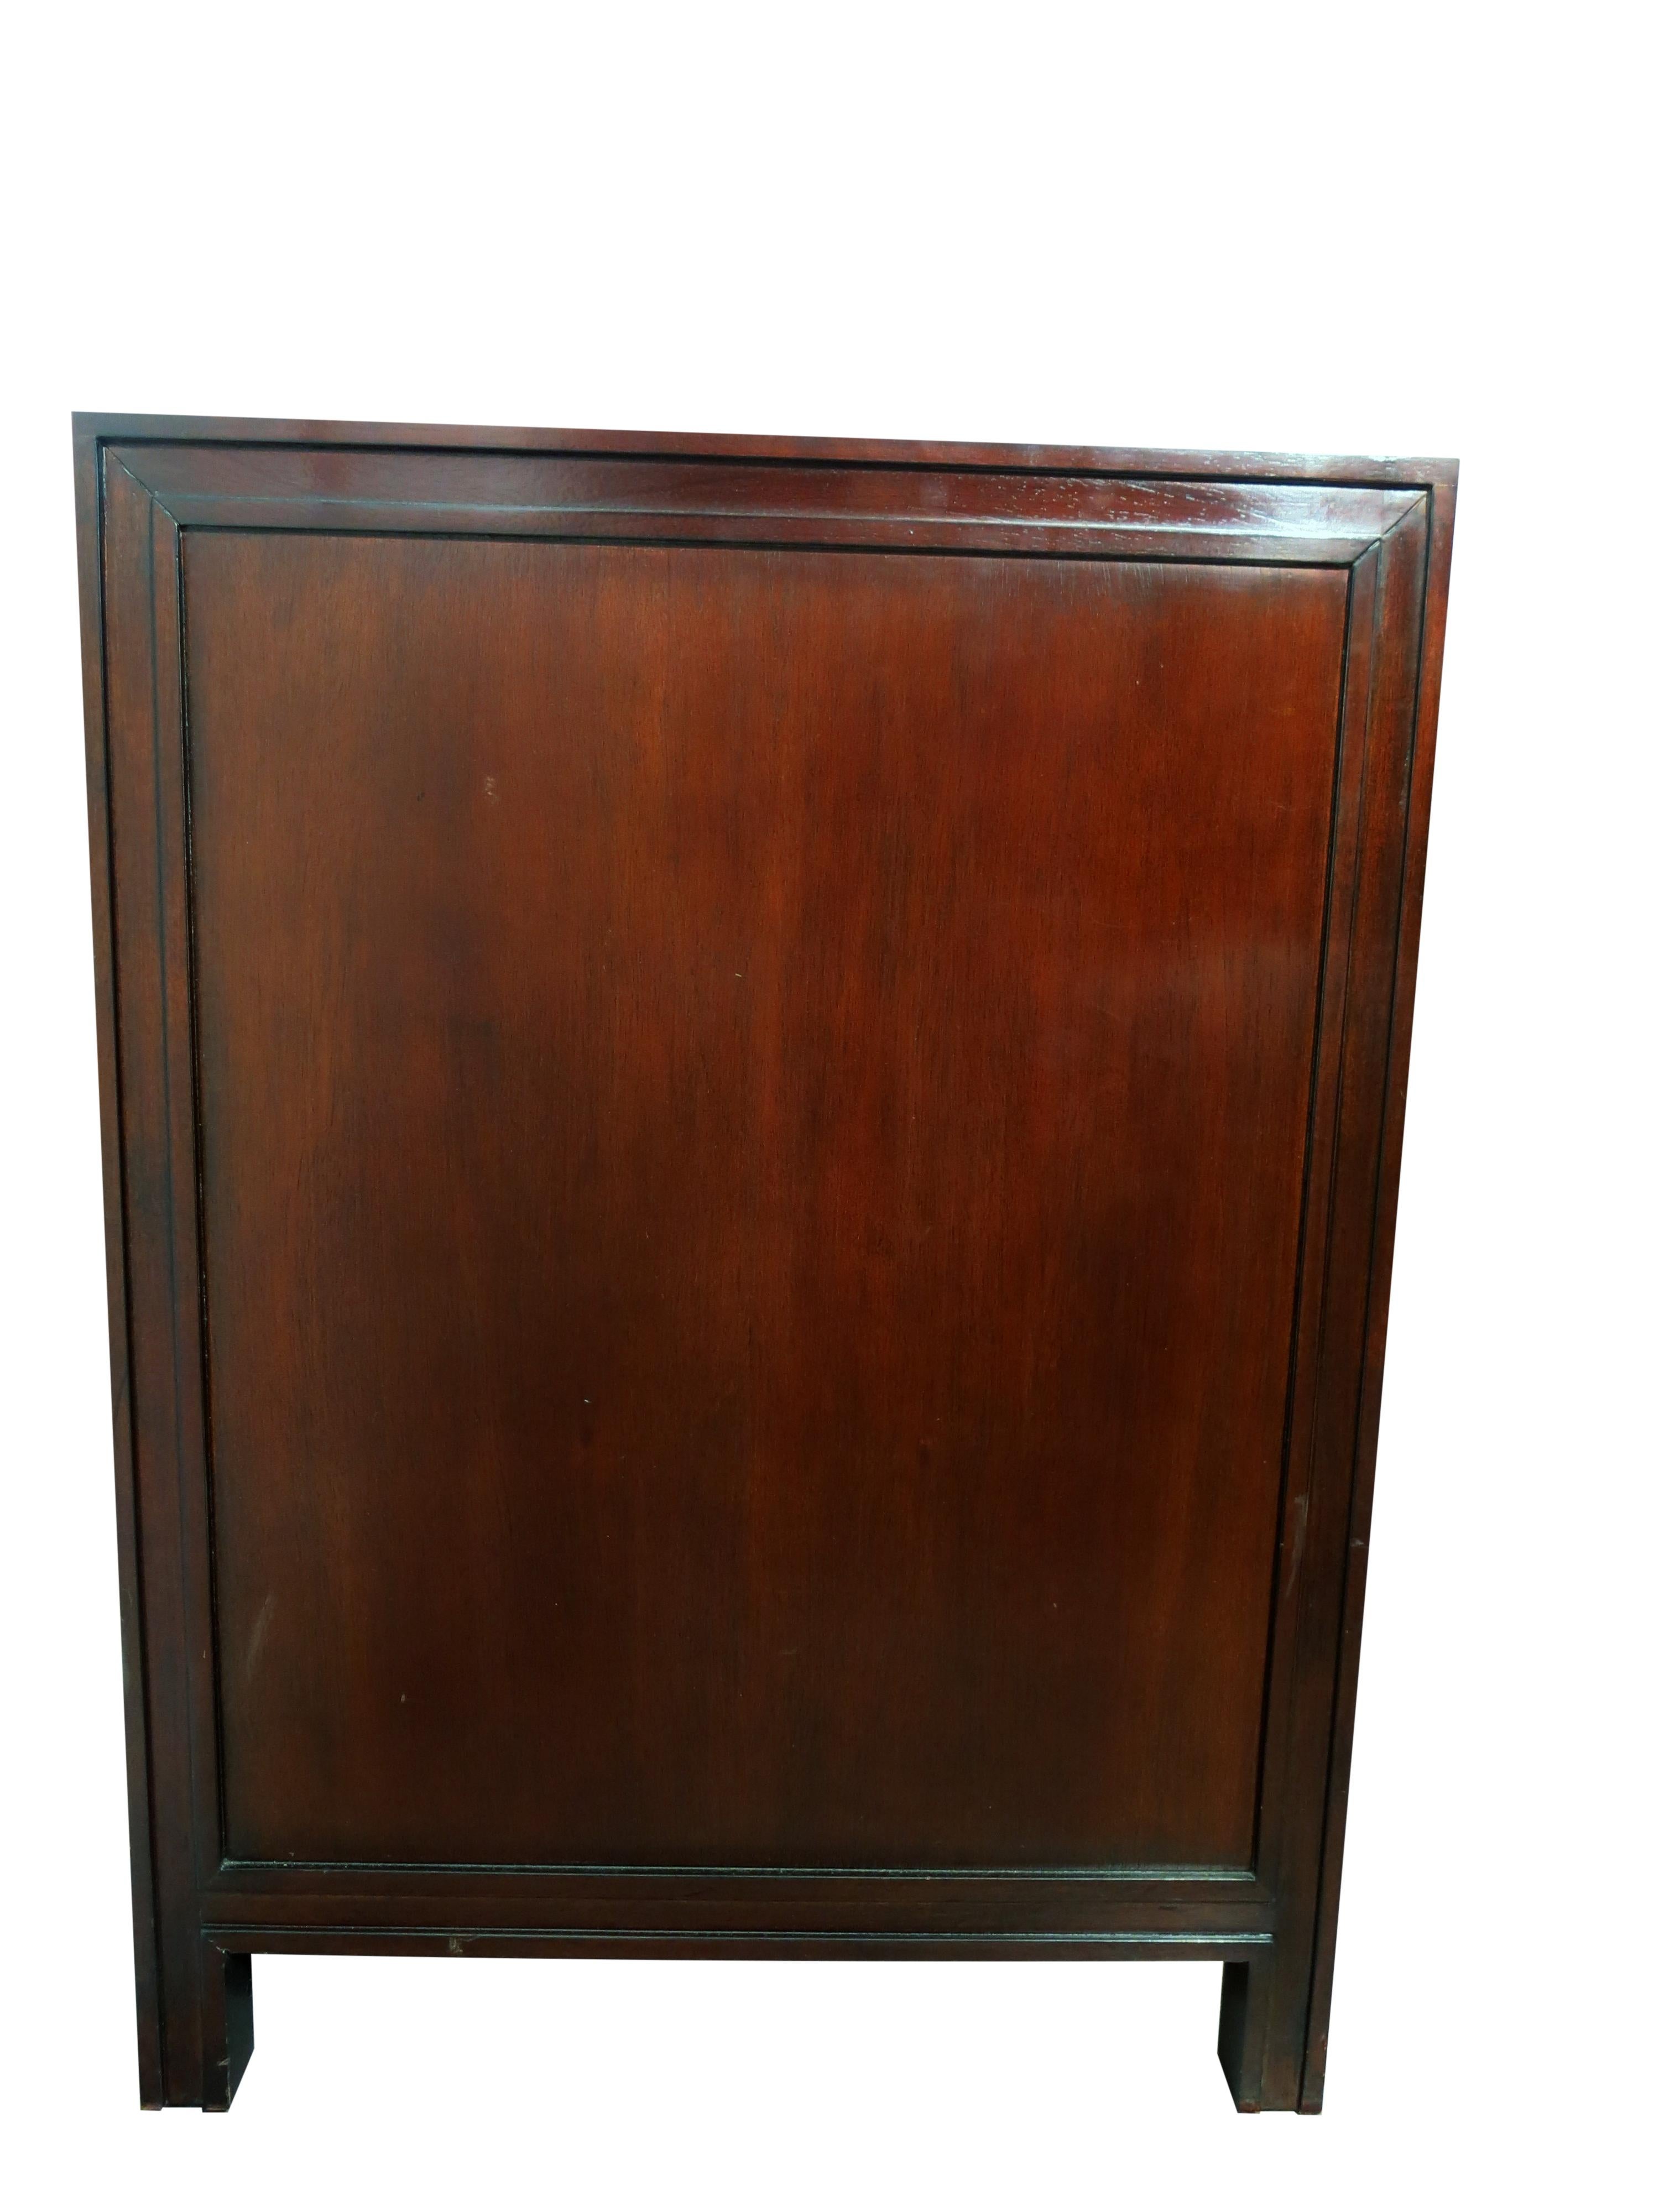 Baker Furniture Company Sideboard in Lacquered Mahogany In Good Condition For Sale In Atlanta, GA